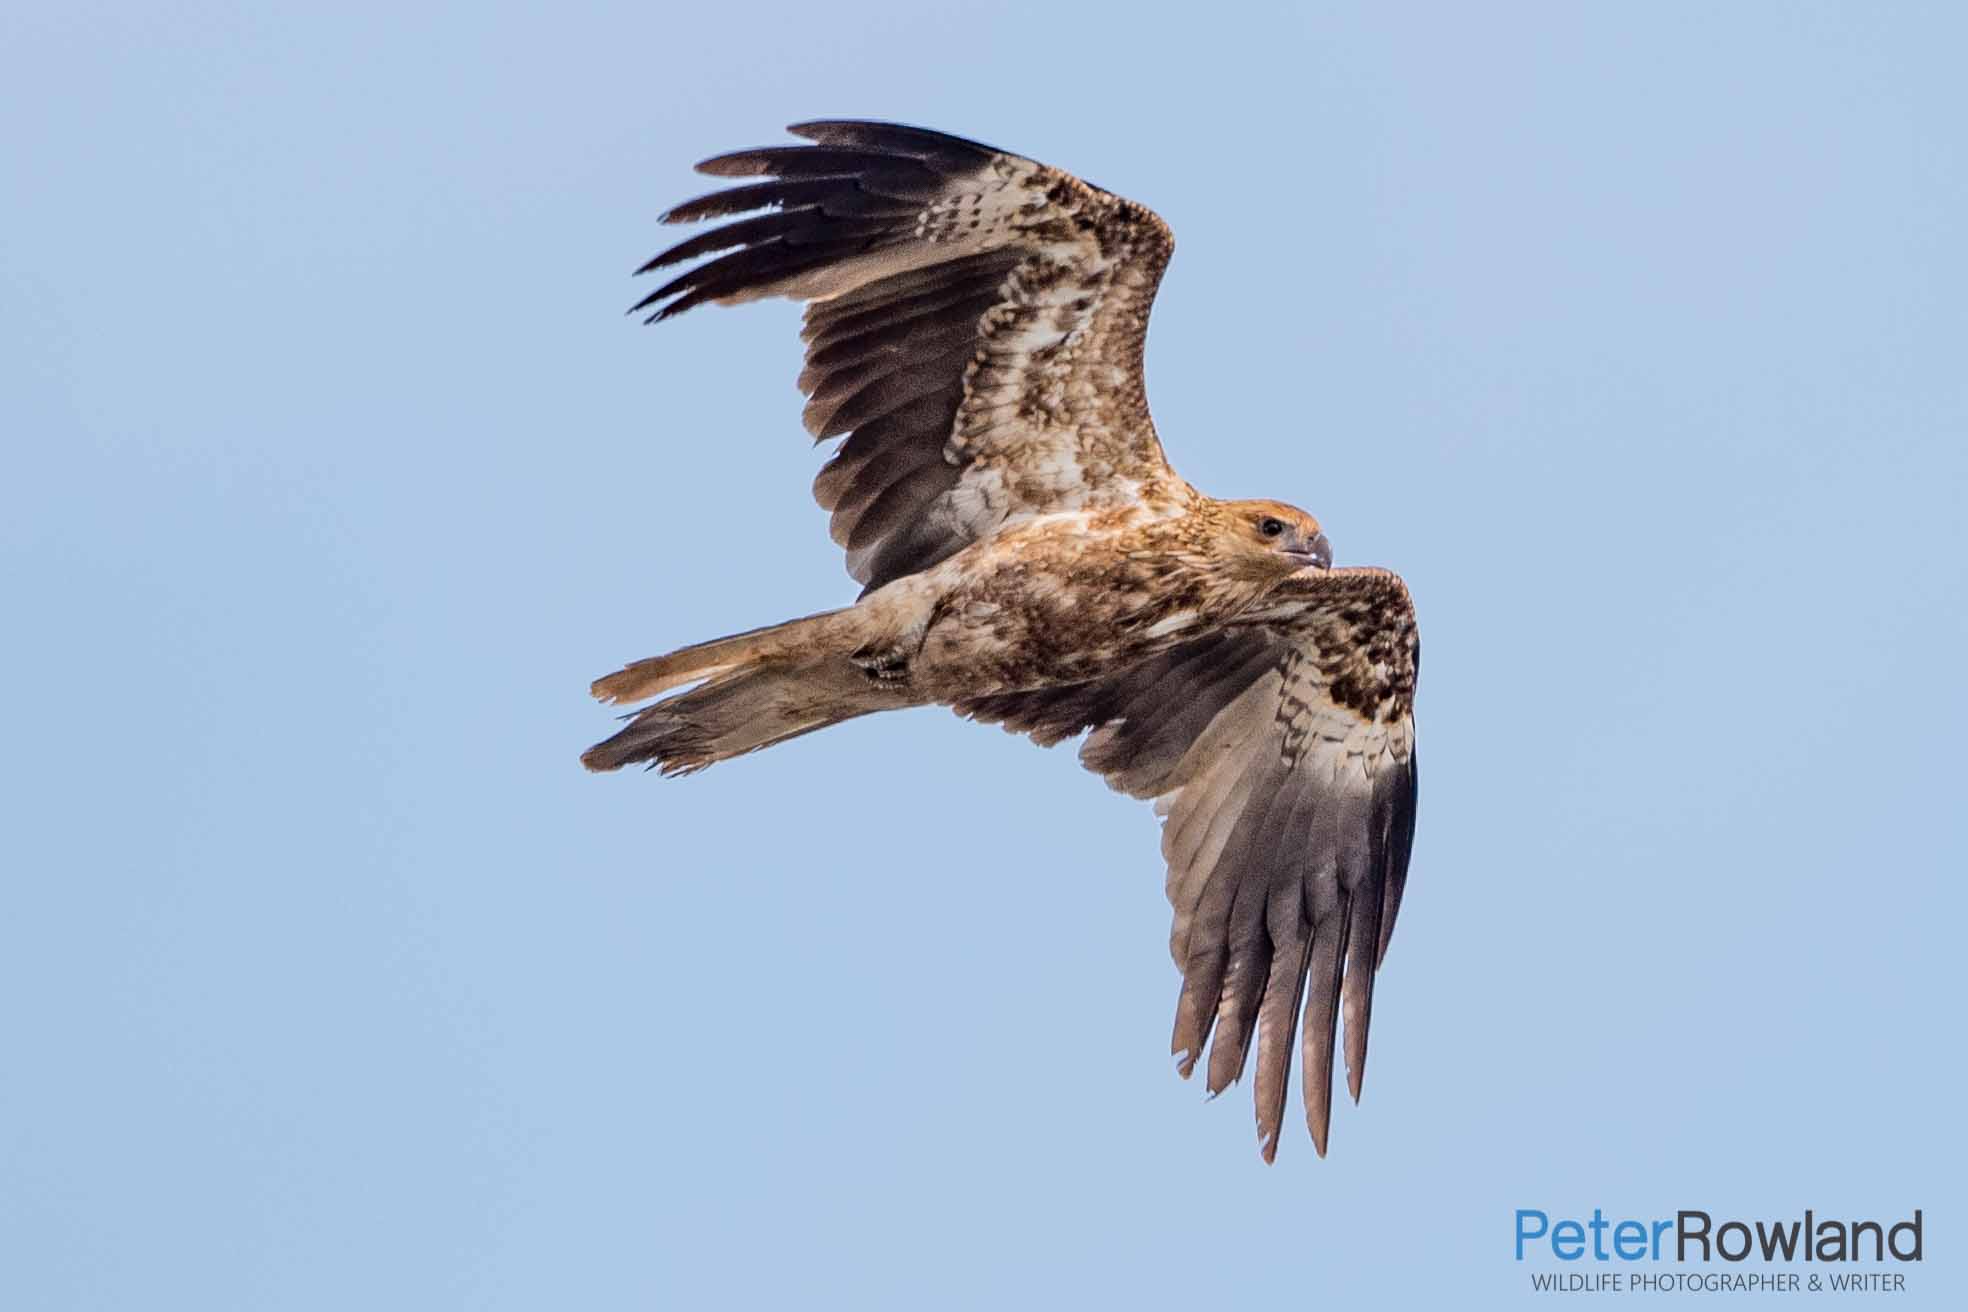 A Whistling Kite flying through the air showing its distinct underwing patters